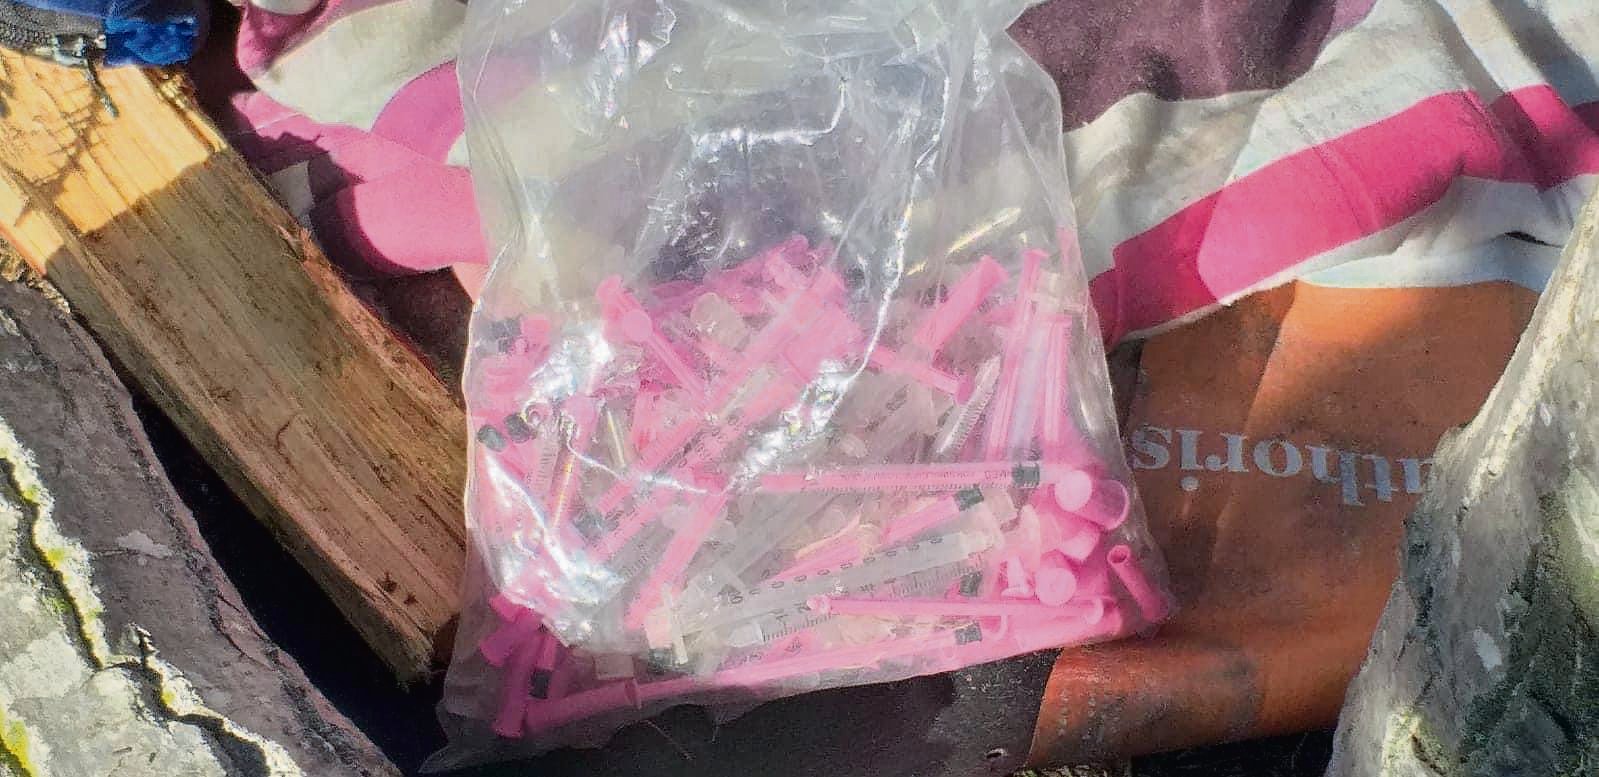 Some of the needles found in Edgemead by members of the local neighbourhood watch.